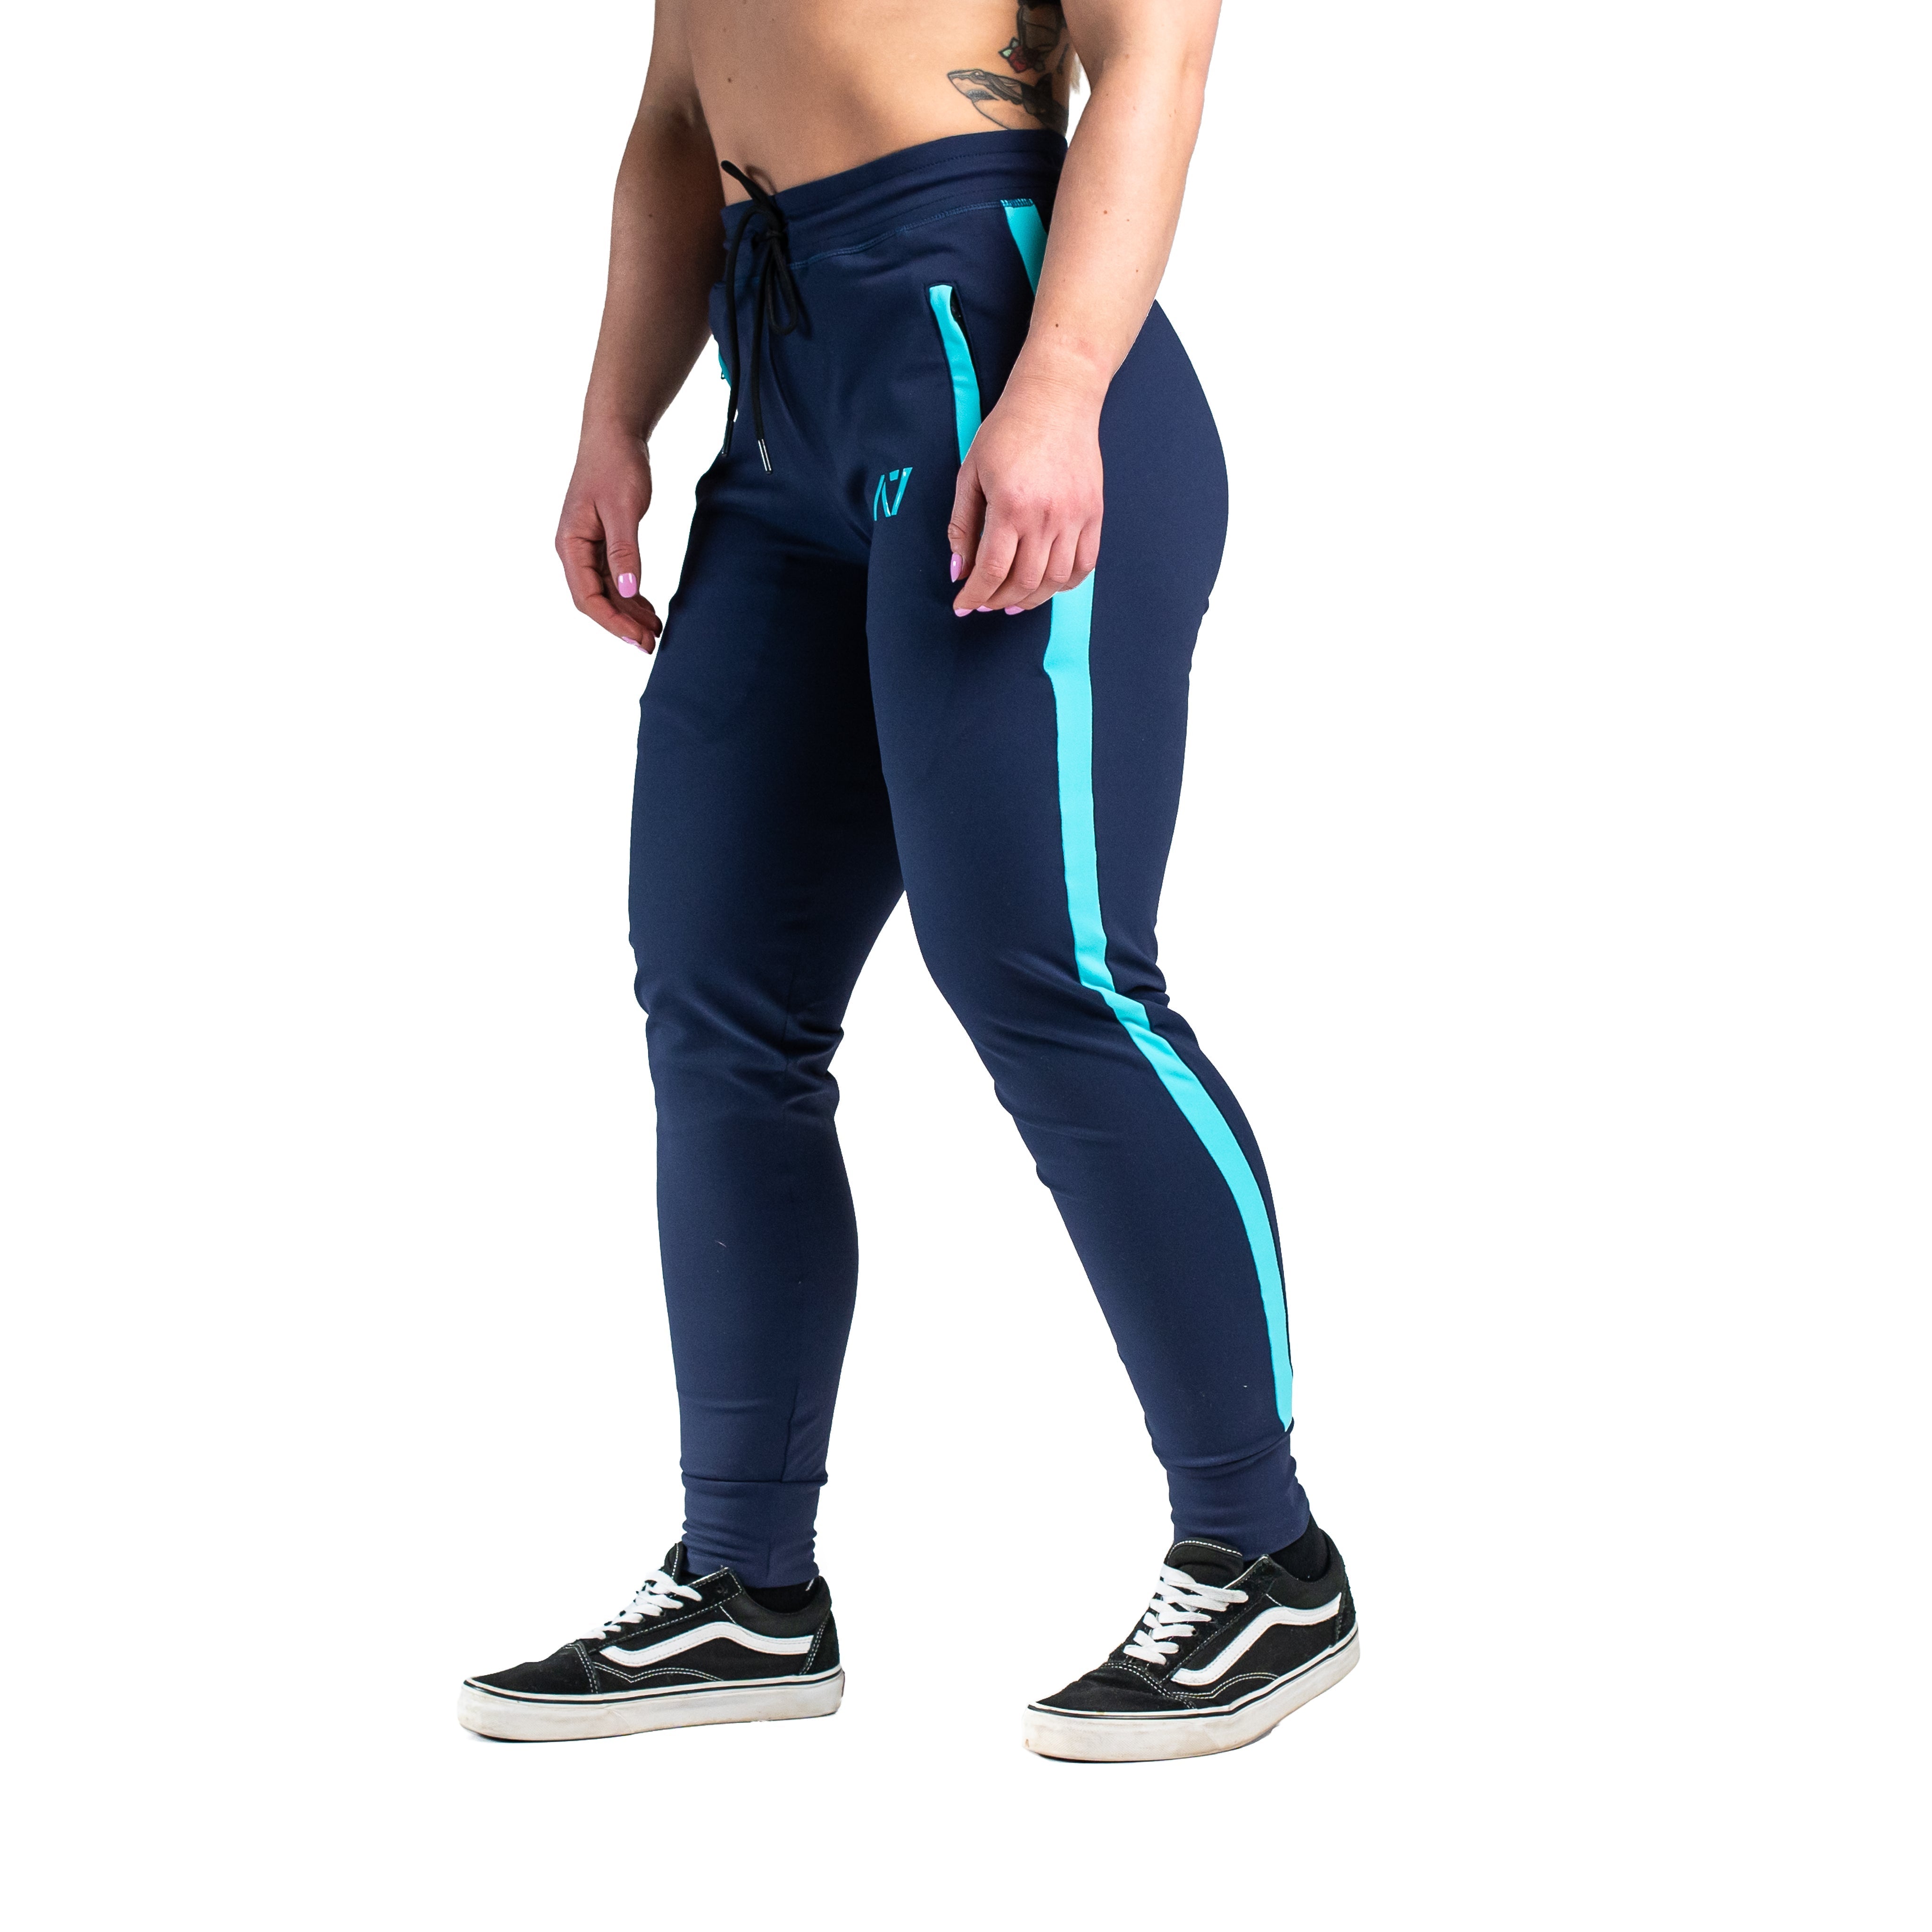 Iced Defy joggers are just as comfortable in the gym as they are going out. These are made with premium moisture-wicking 4-way-stretch material for greater range of motion. These are a great fit for both men and women and offer deep zippered pockets and tapered leg design. . Purchase Iced Defy Joggers from A7 UK shipping to UK or A7 Europe shipping to EU. 